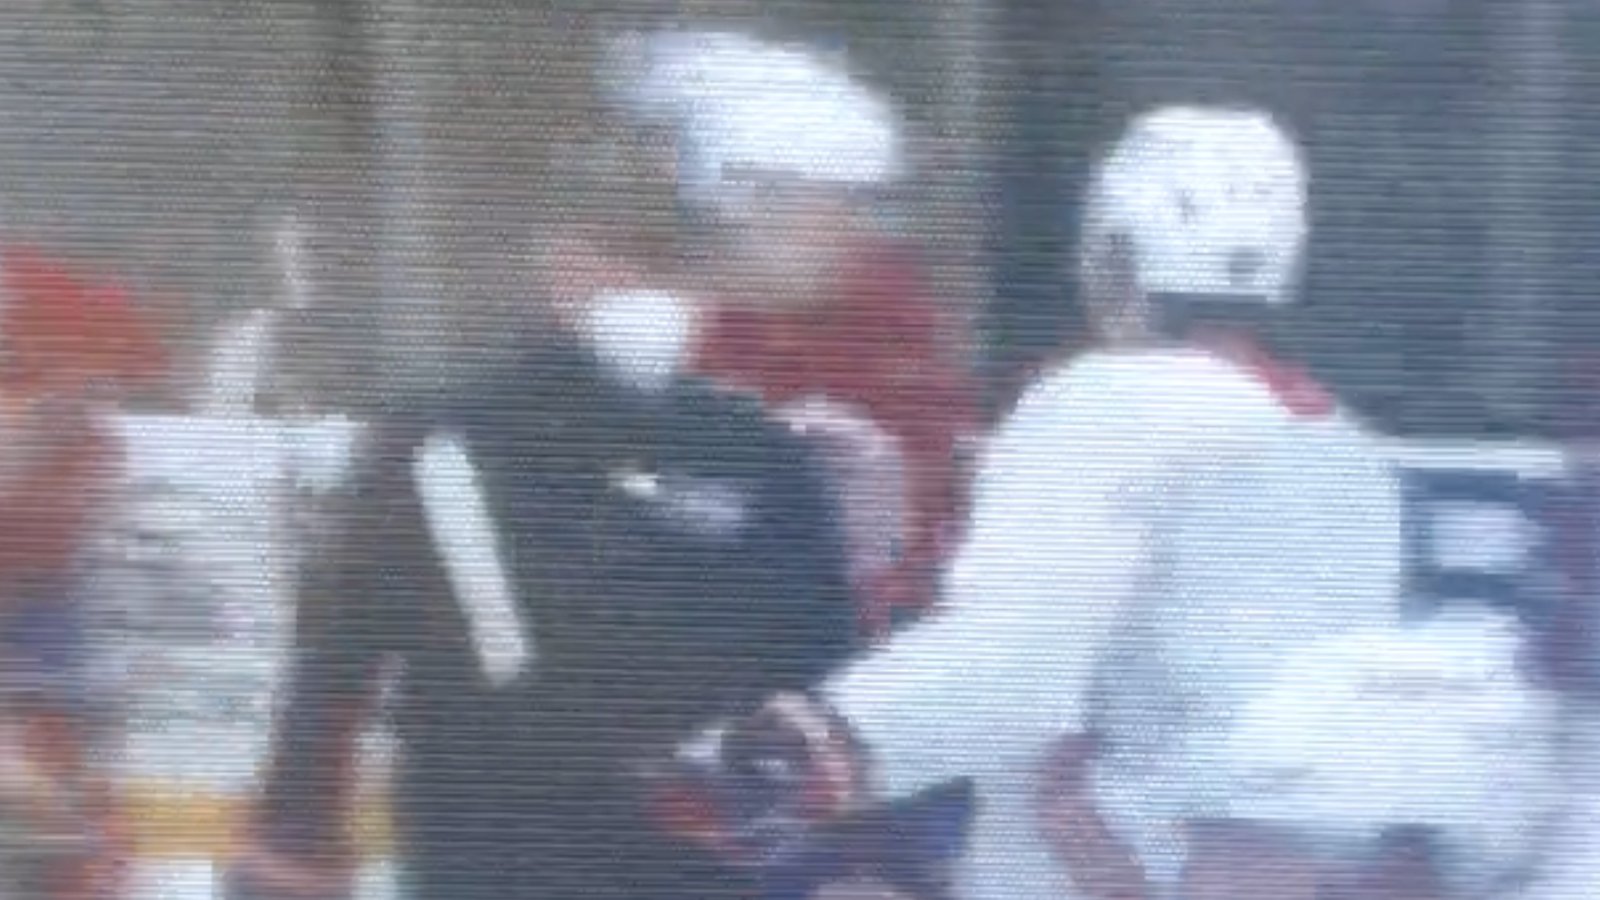 Feud erupts in the middle of Habs’ practice between Drouin and coach Ducharme